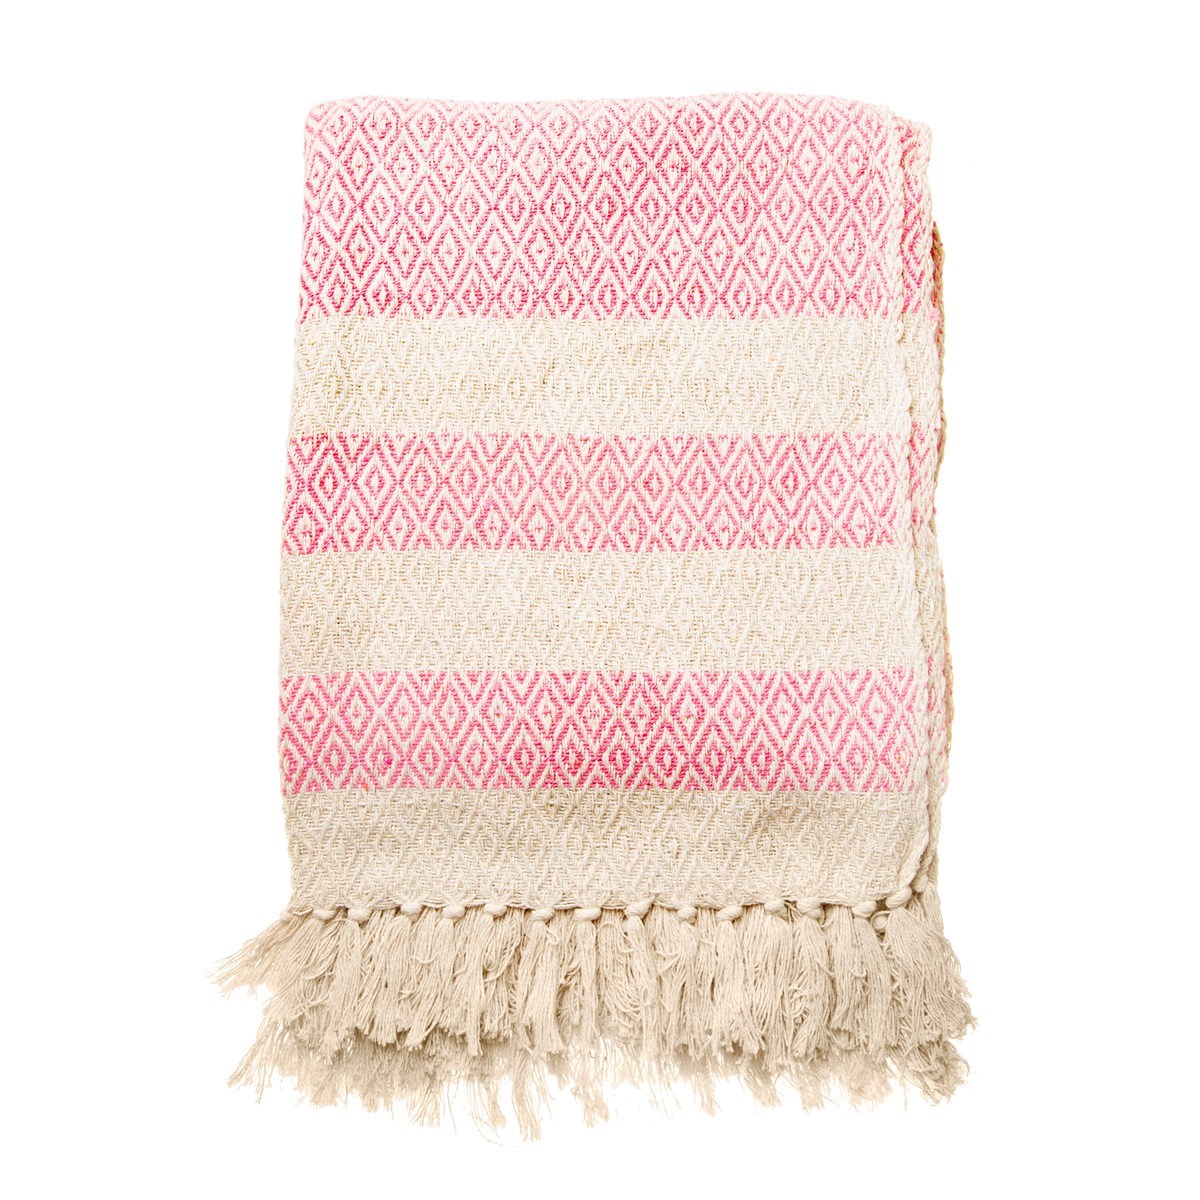 Pink Diamond Twill Blanket Throw Sass & Belle Made With Recycled Materials